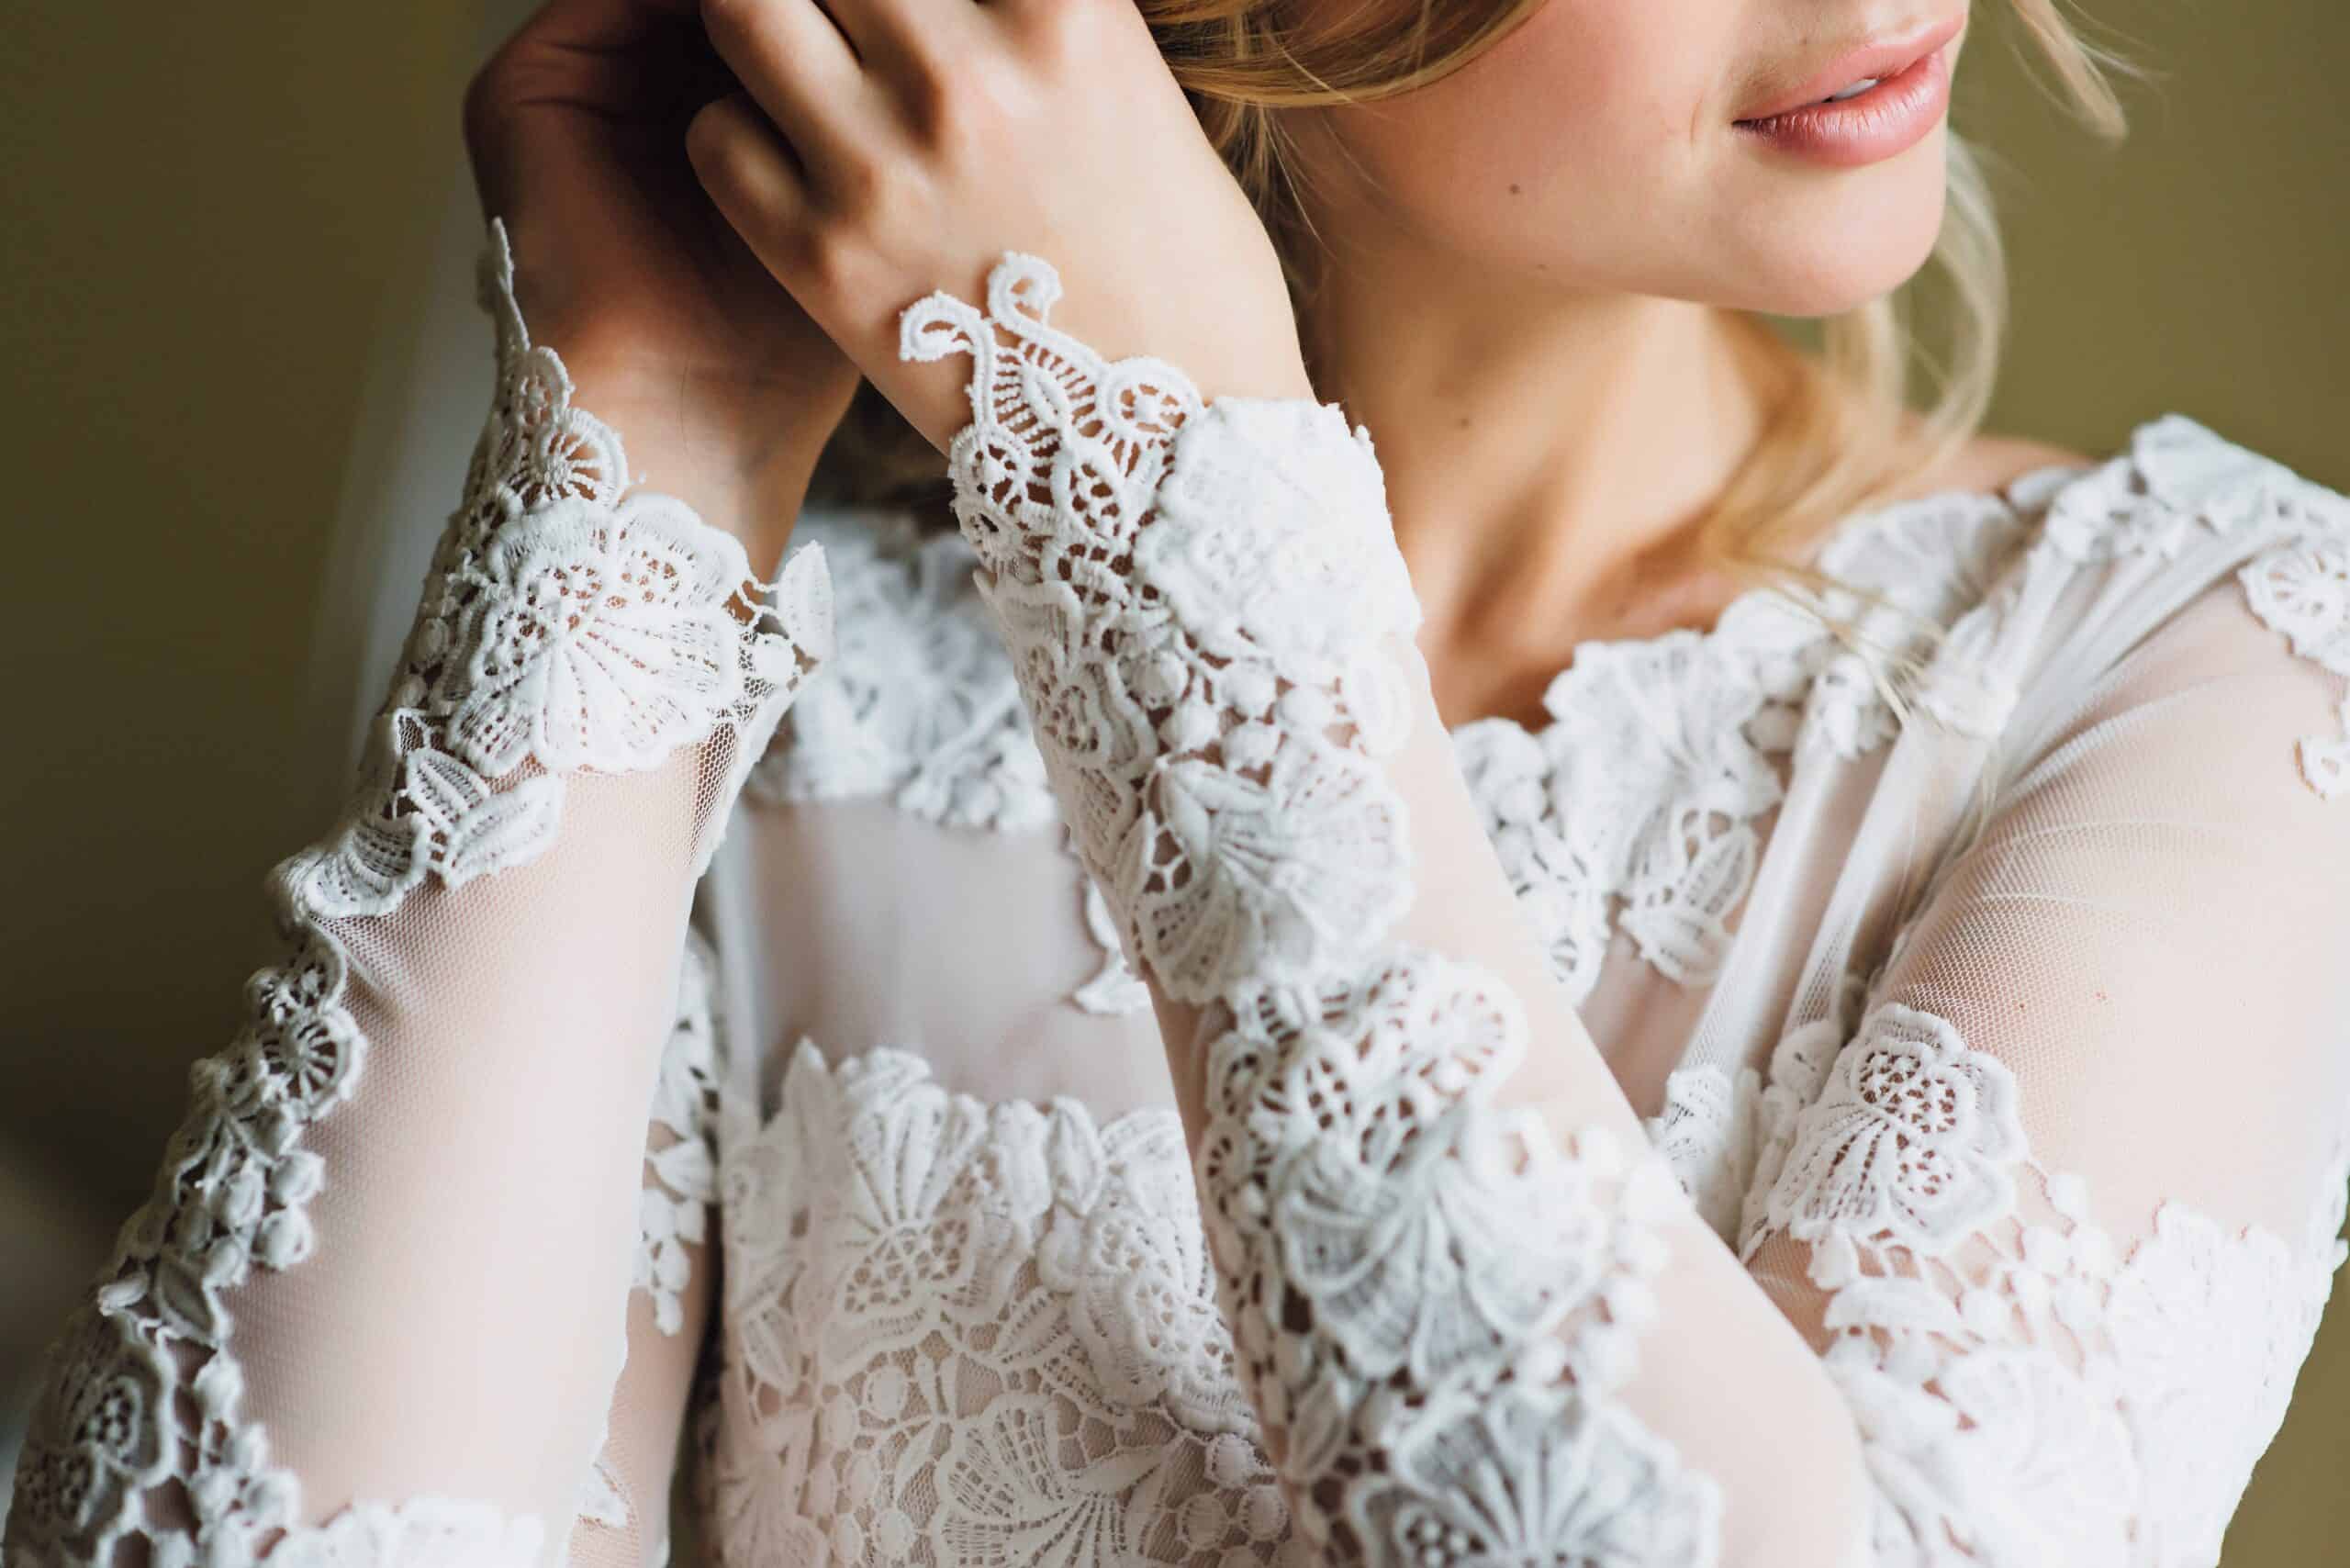 Wedding dresses that are made for winter.